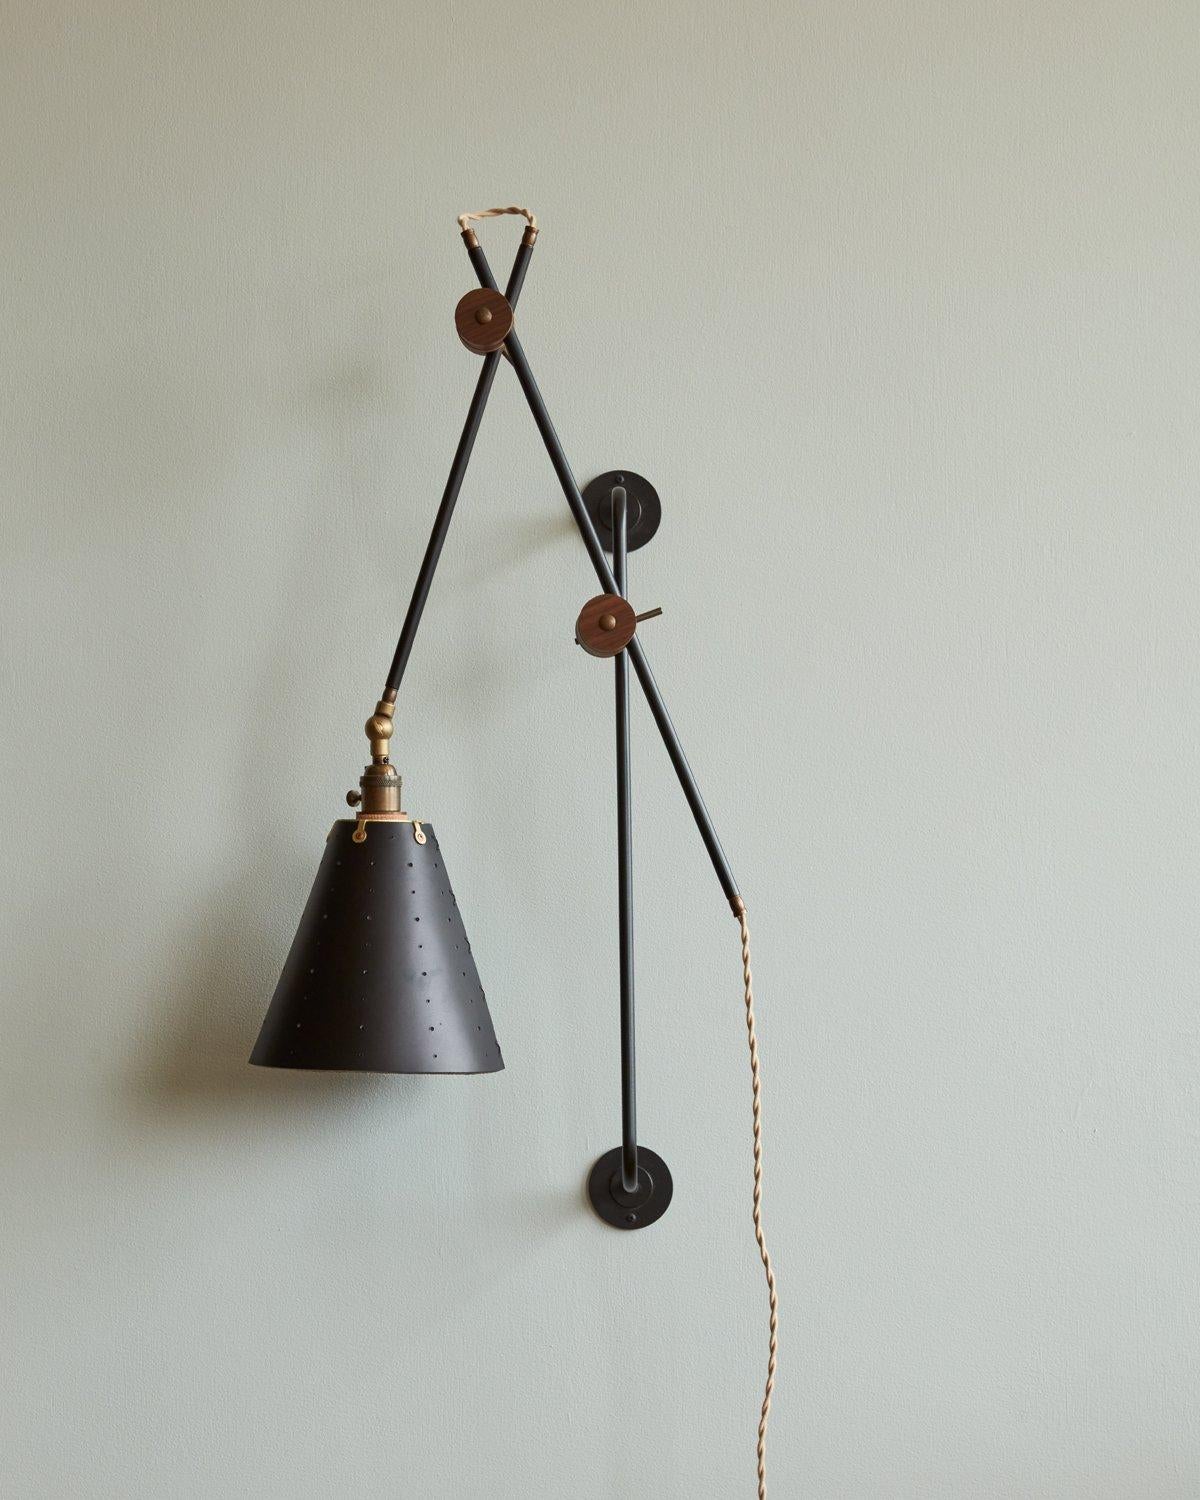 Celebrated for its striking composition and versatility, the Grace Articulating Wall Sconce is a true hallmark of ingenuity in lighting design. As handsome as it is useful, this plug-in sconce connects two lengths of steel piping with a black walnut